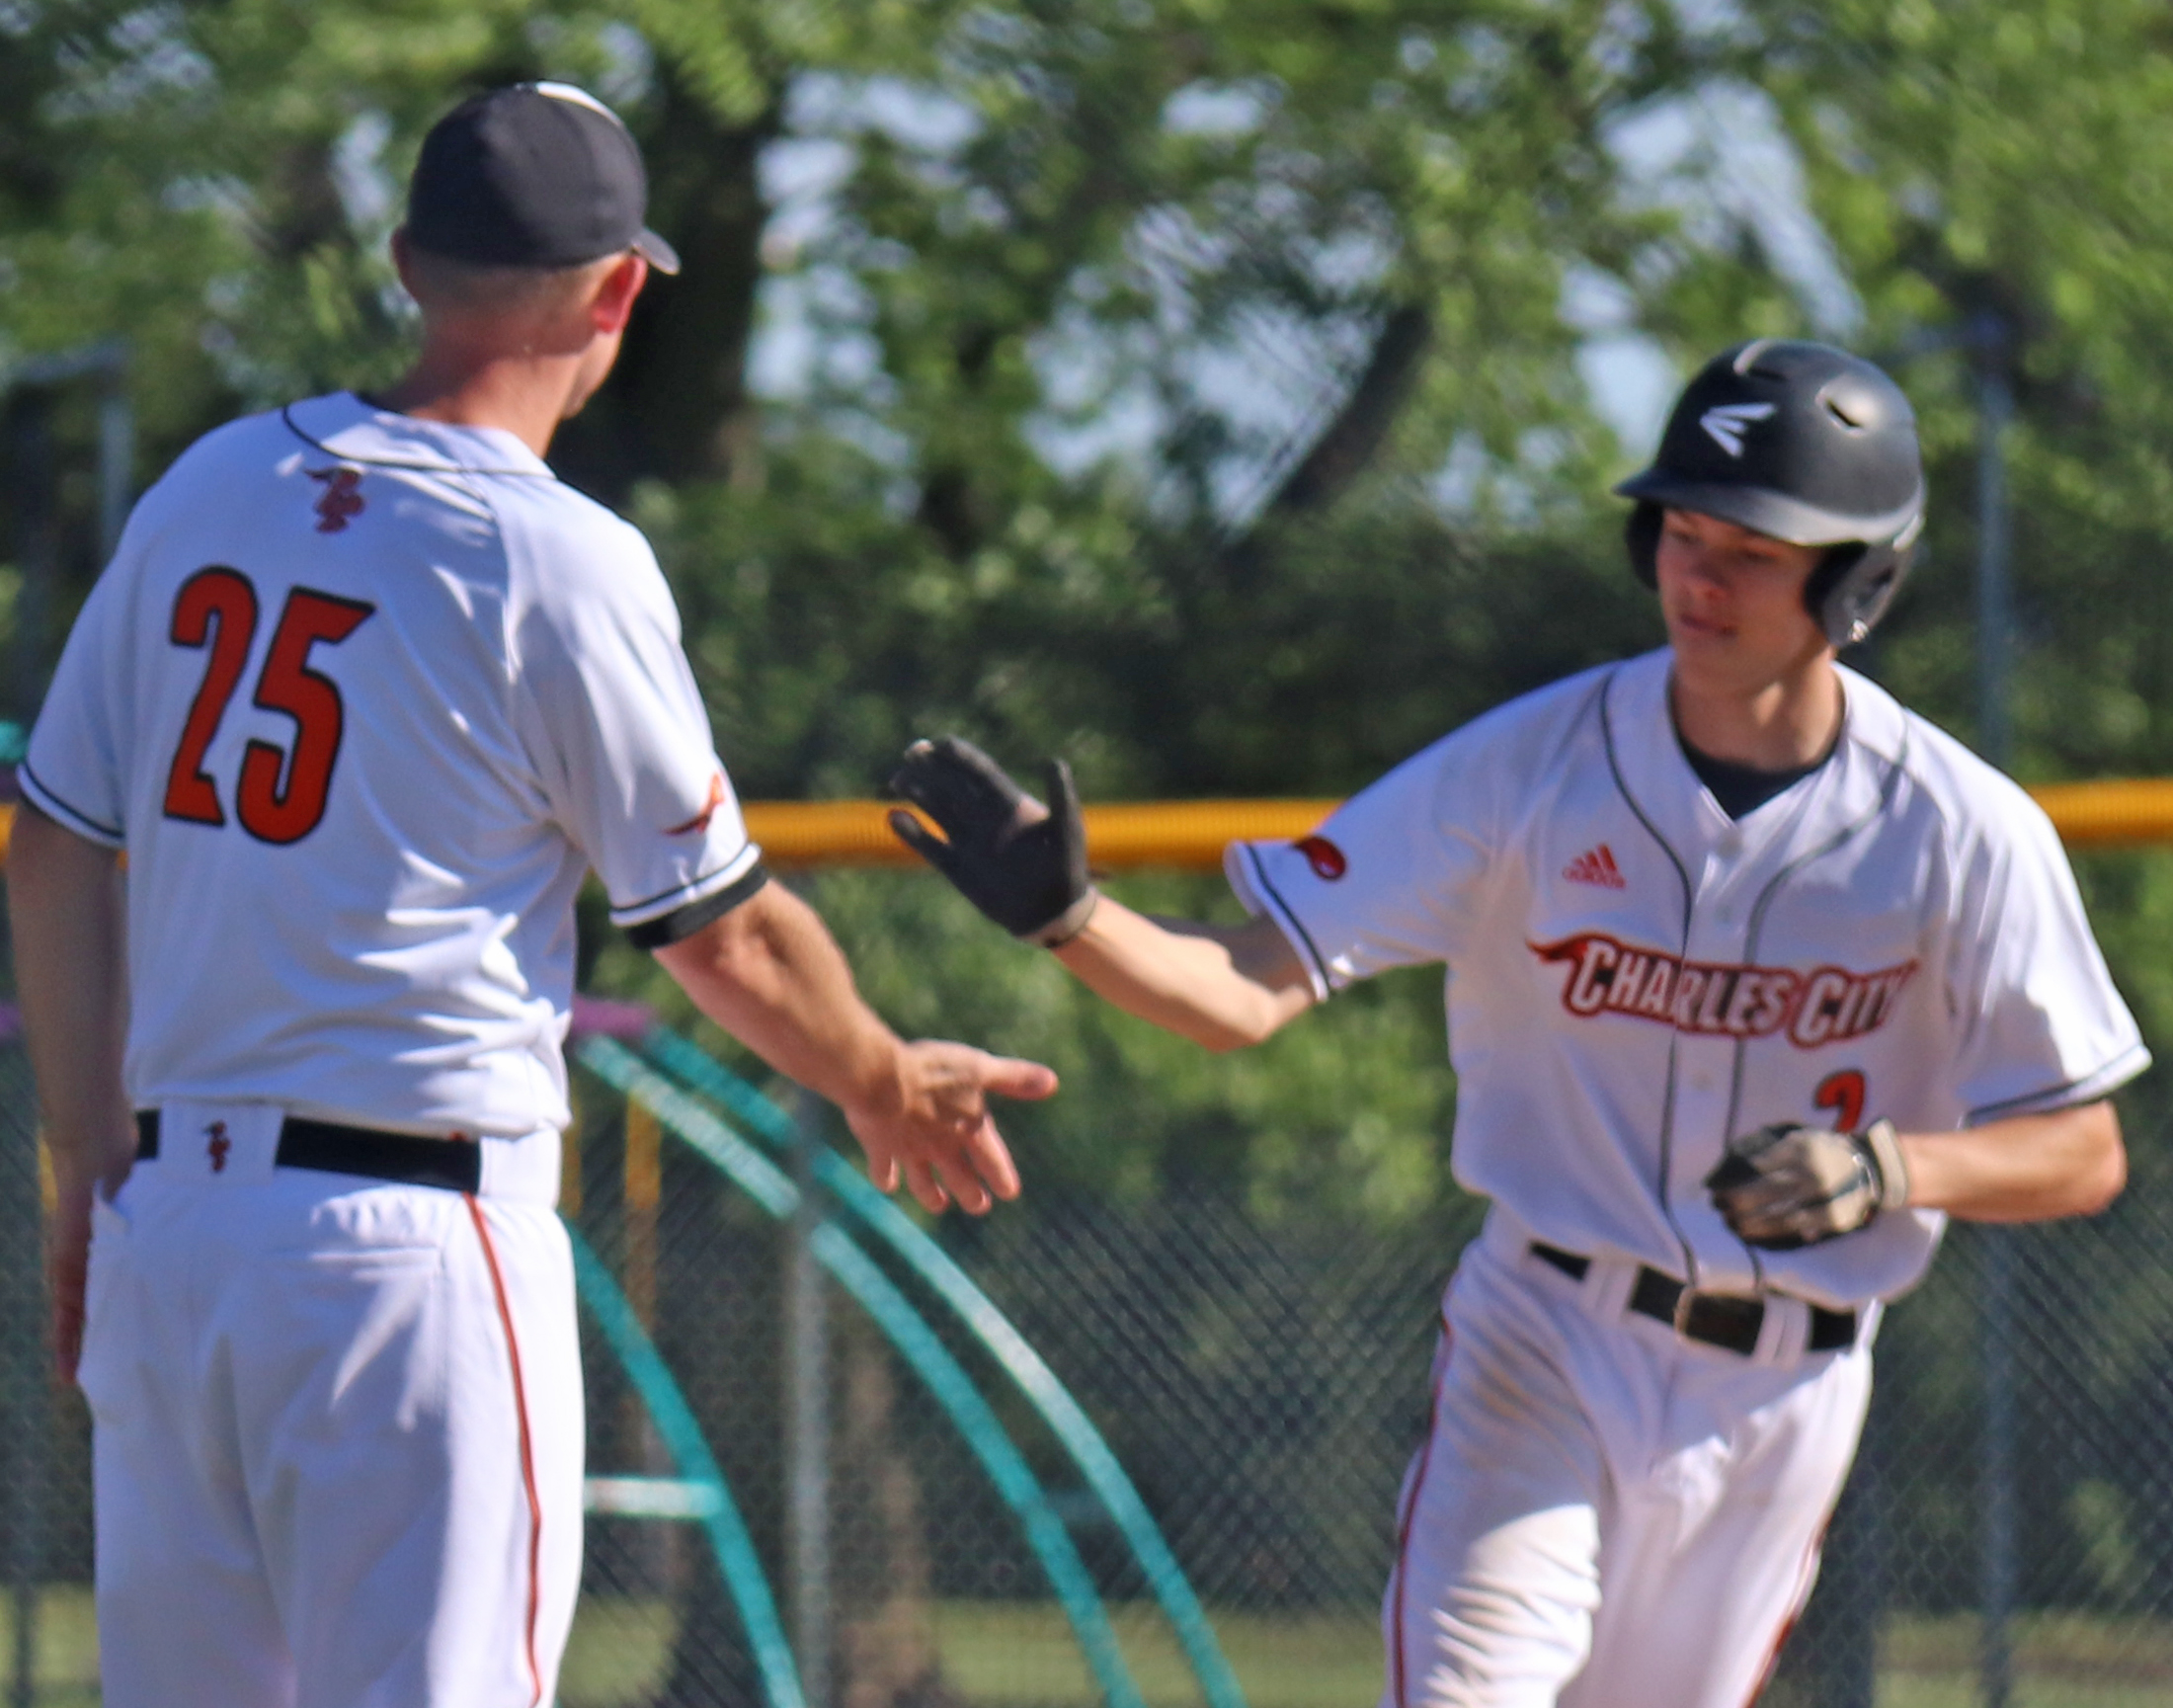 Comets inflict damage during DH sweep of Cadets